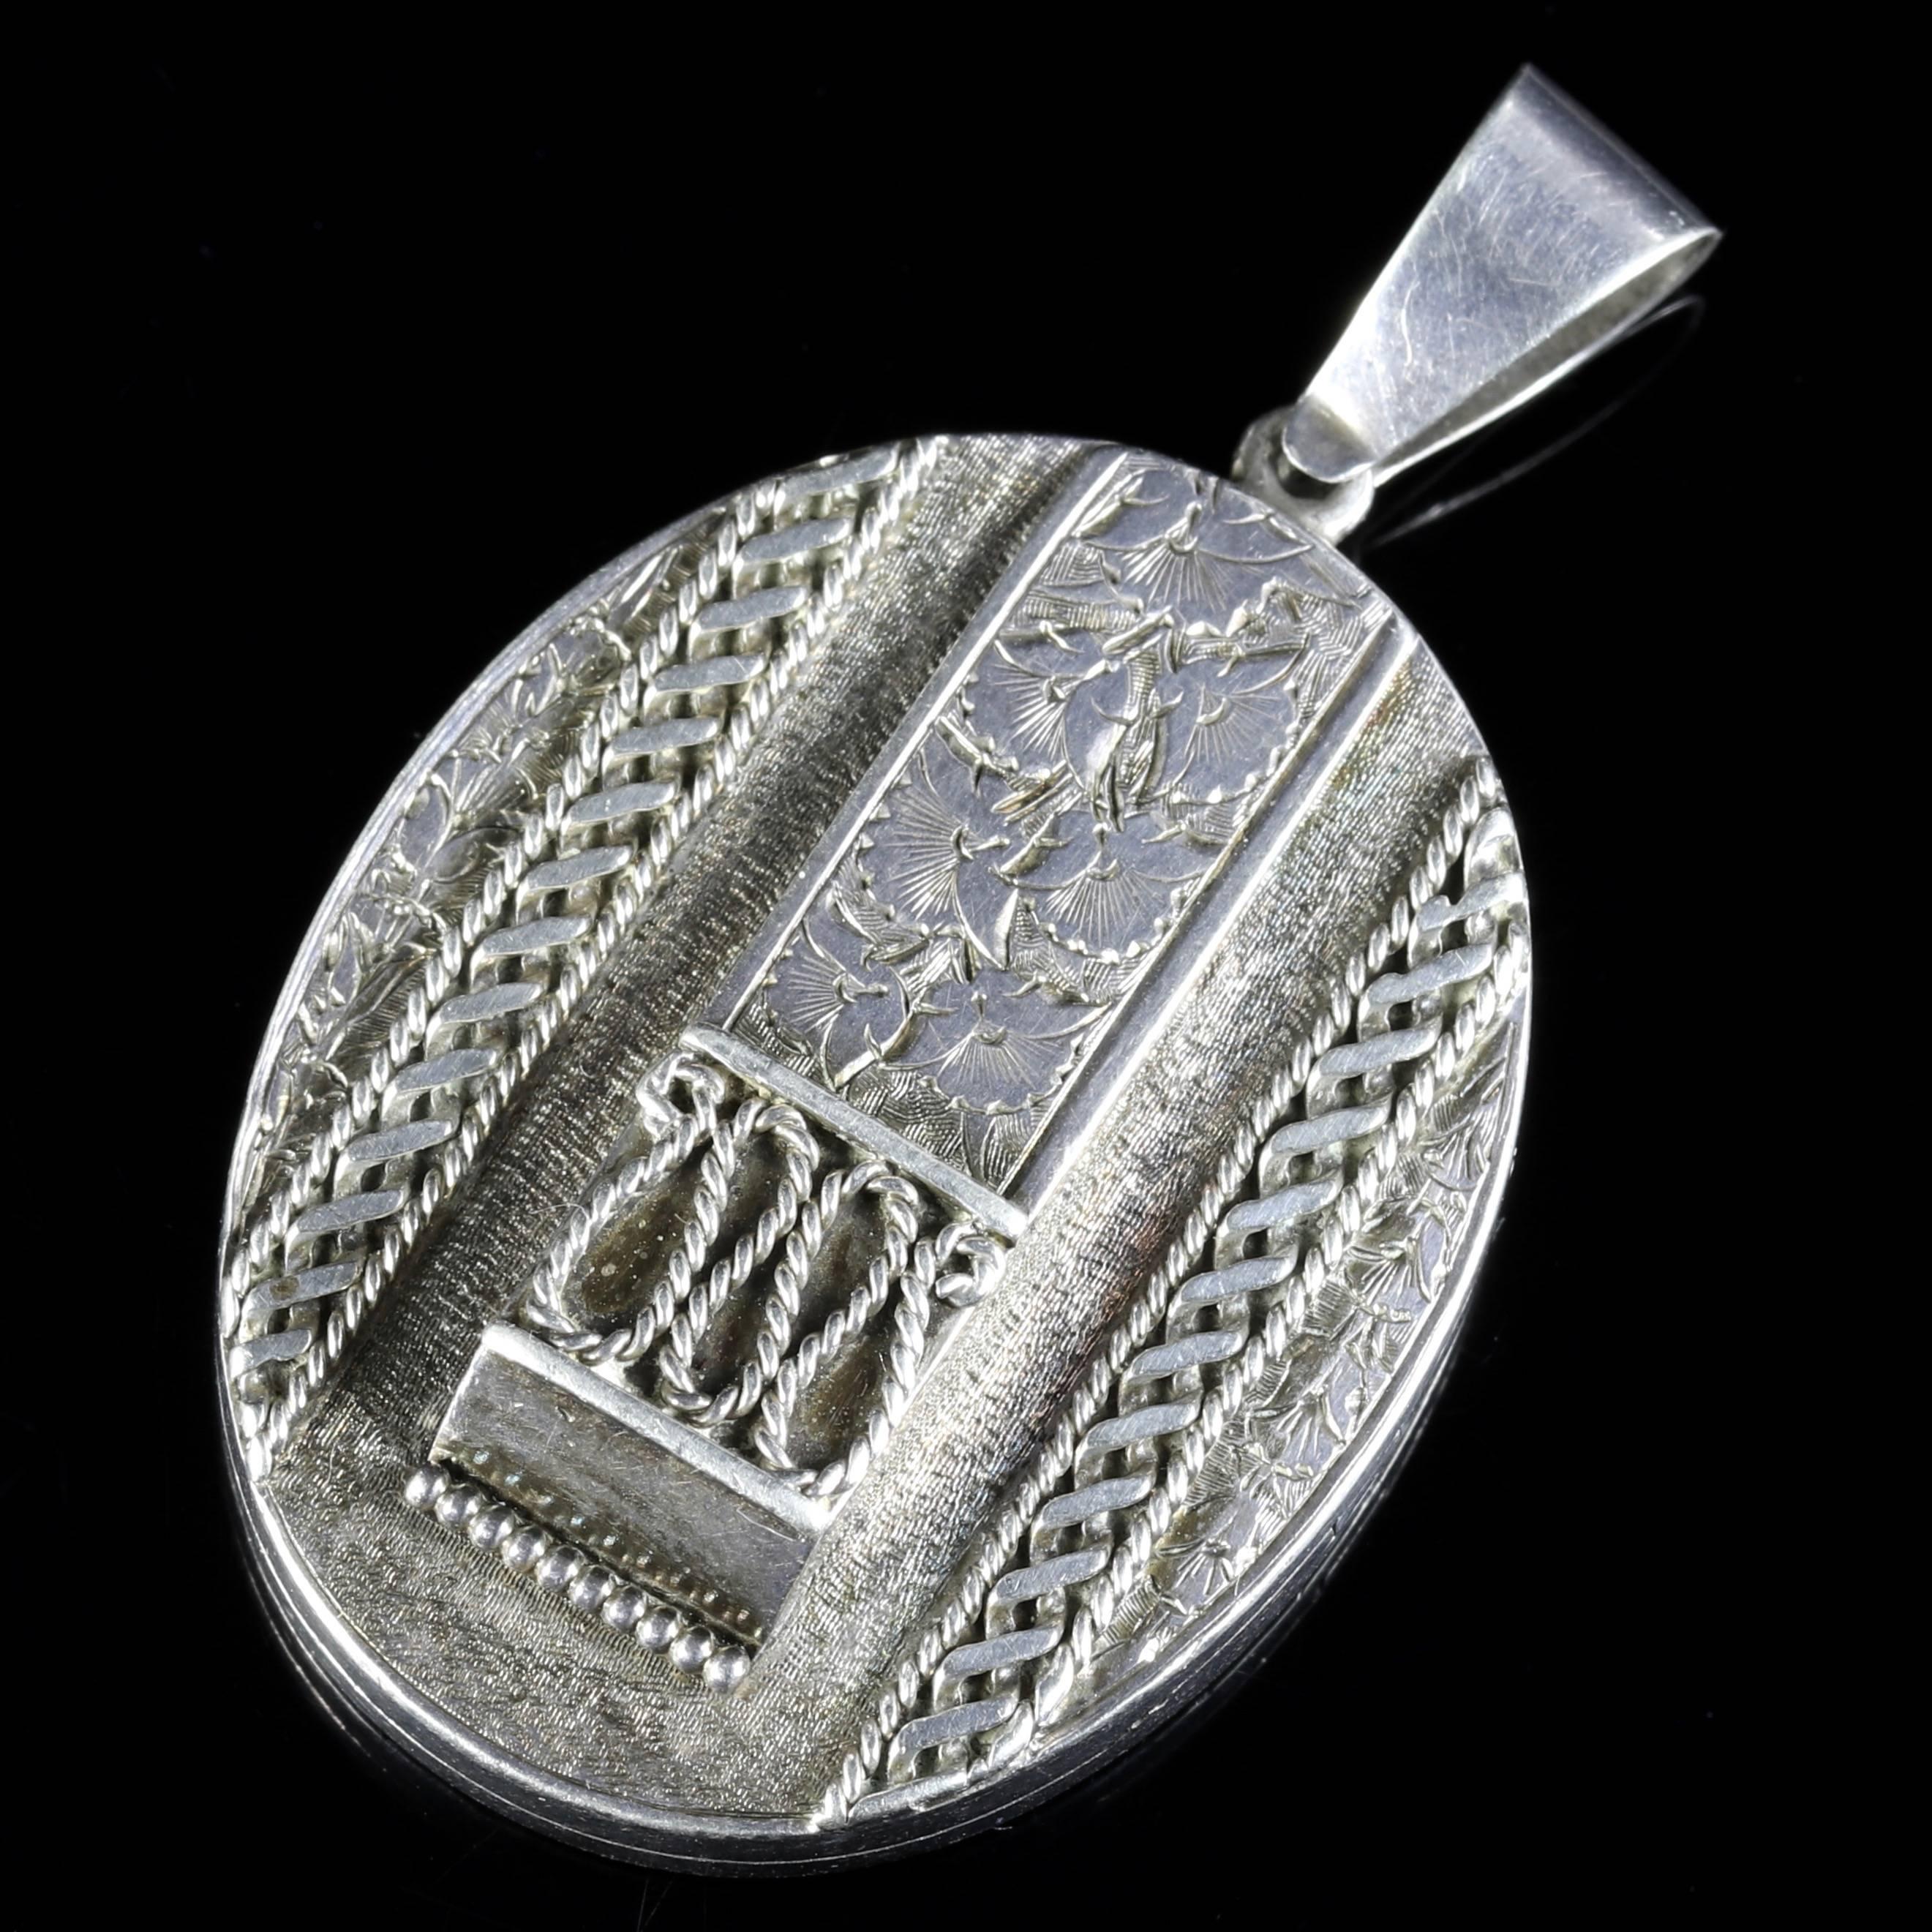 This genuine Victorian Sterling Silver locket is Circa 1900.

The locket is engraved with ivy.

Ivy stands for I cling to thee a beautiful romantic engraved symbol of love.

Beautiful workmanship can be seen all round.

The locket opens and closes